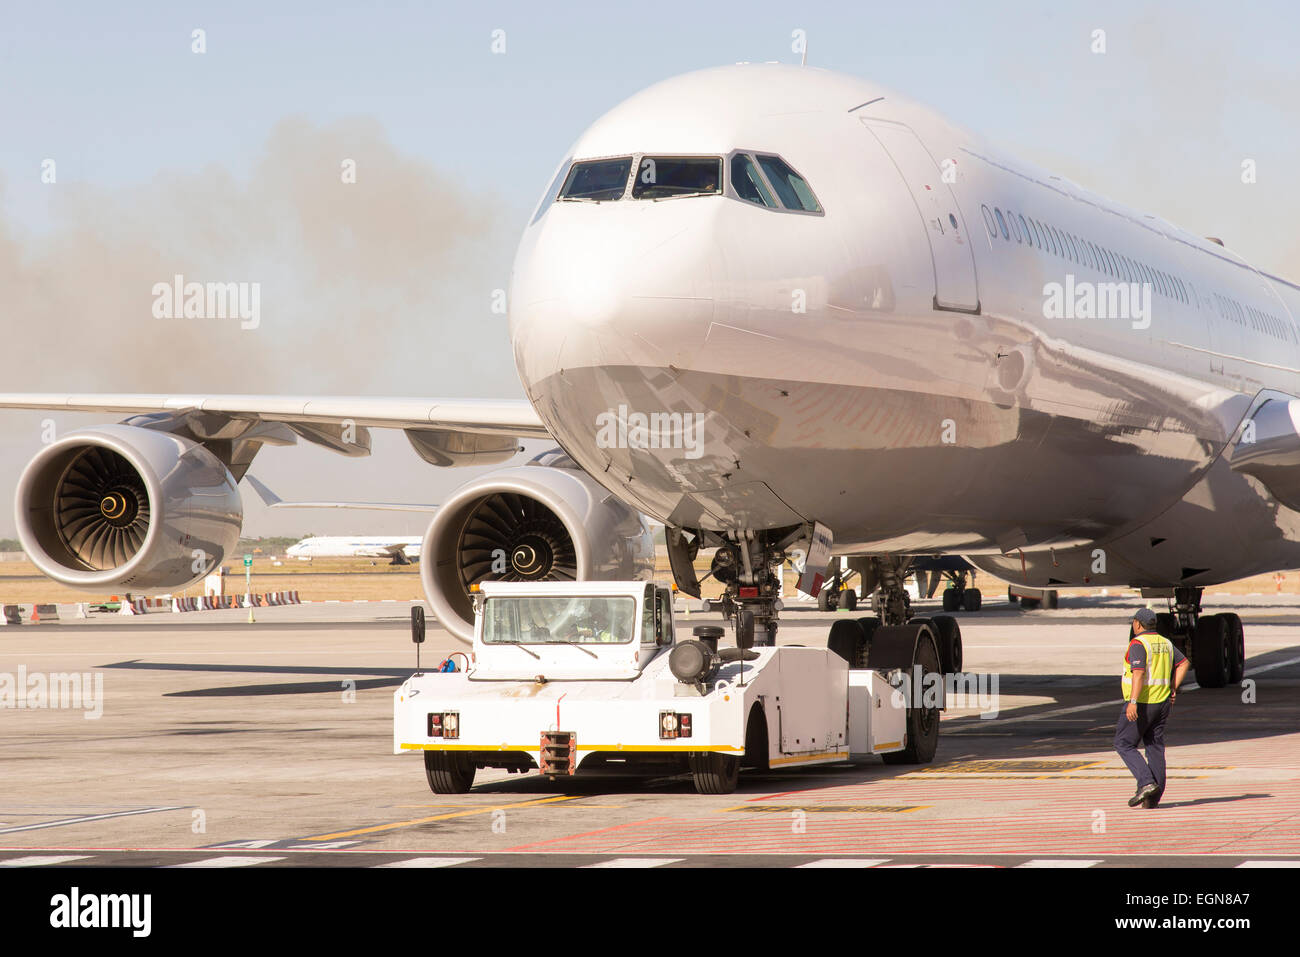 Passenger jet being towed by a tug on airport taxiway Stock Photo